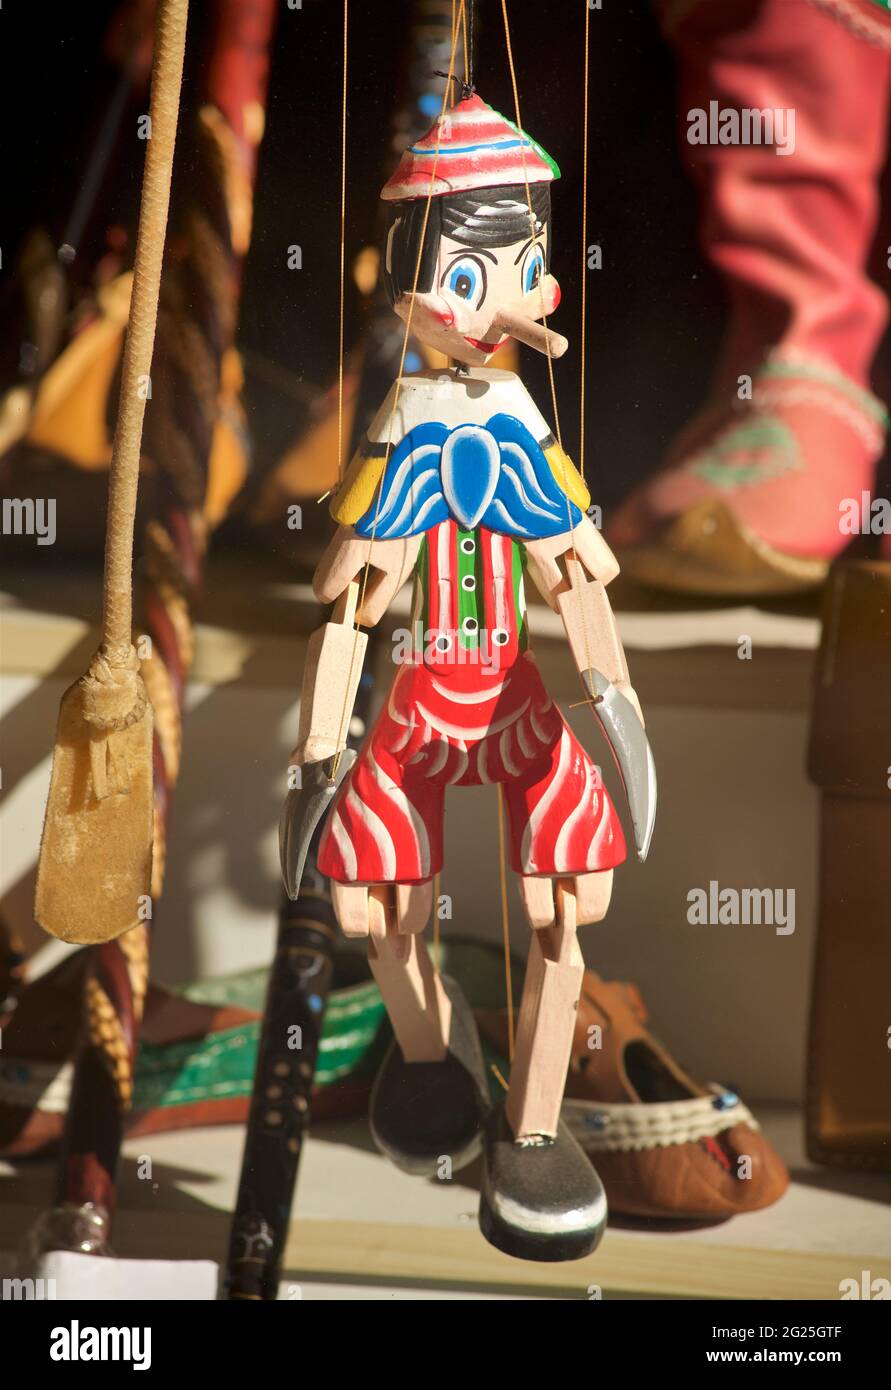 Wooden marionette of Pinocchio displayed for sale in Istanbul, Turkey Stock Photo